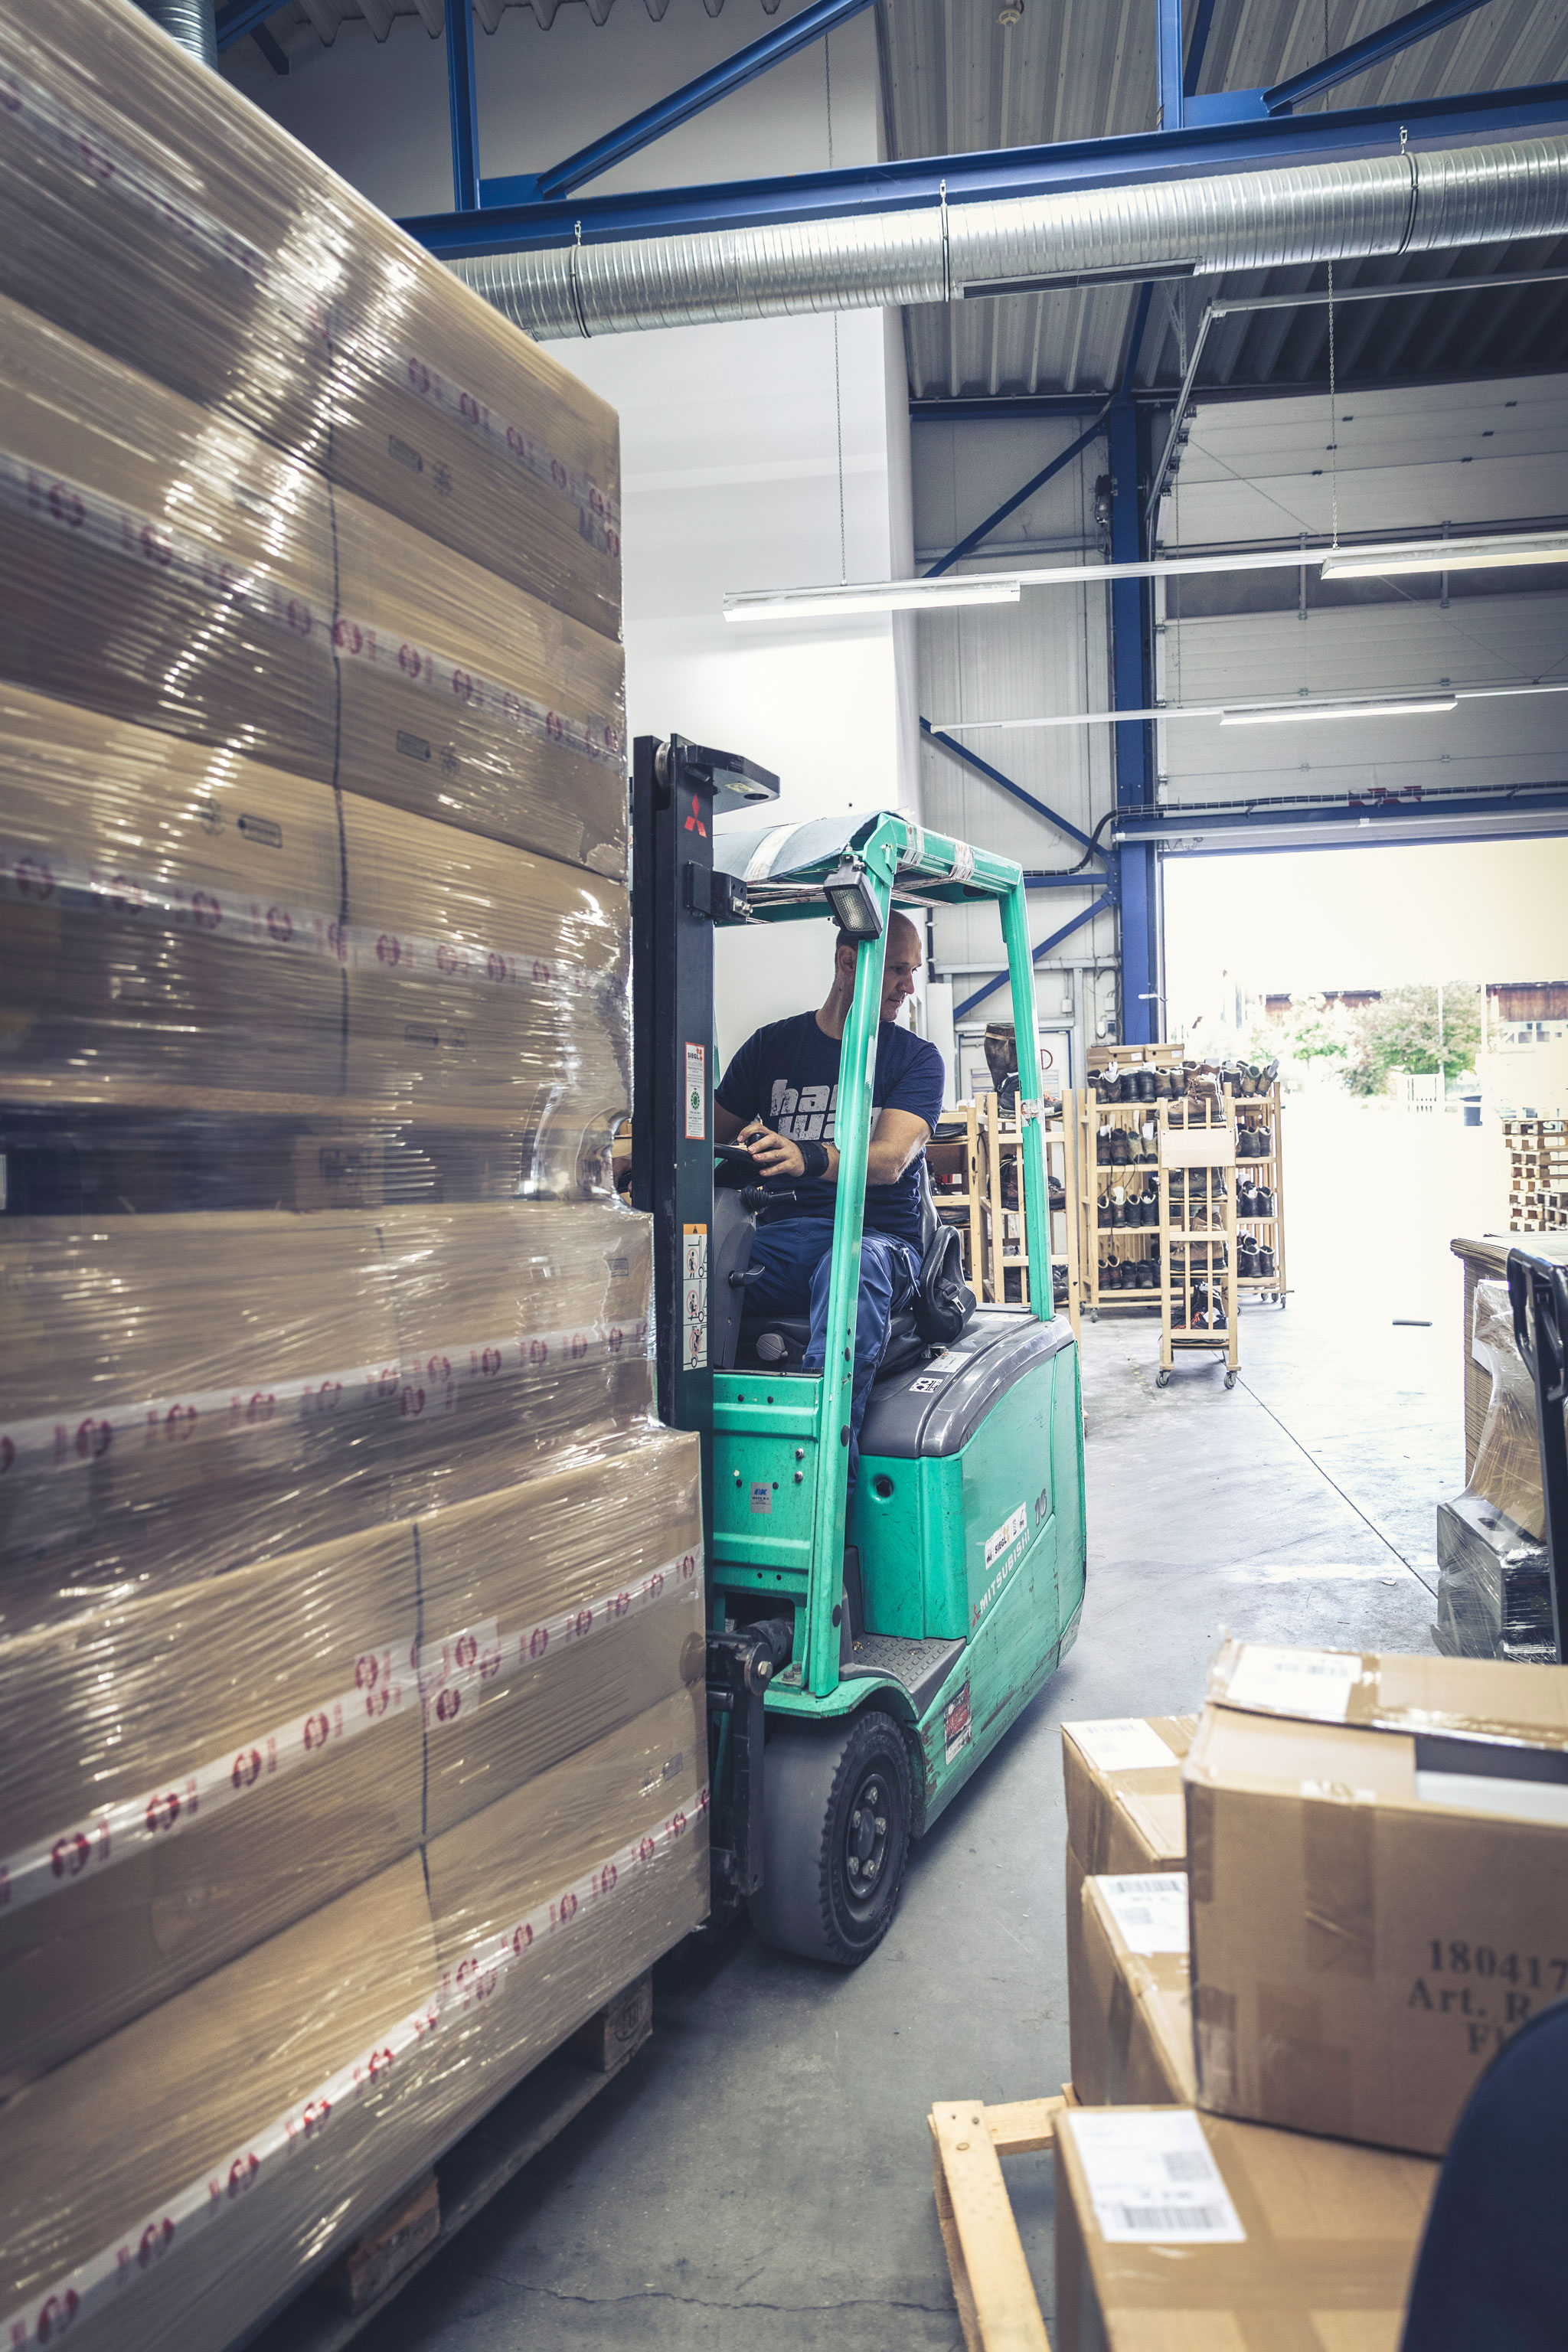 Hanwag employee Mario, driving the forklift truck in the warehouse. Best walking boots